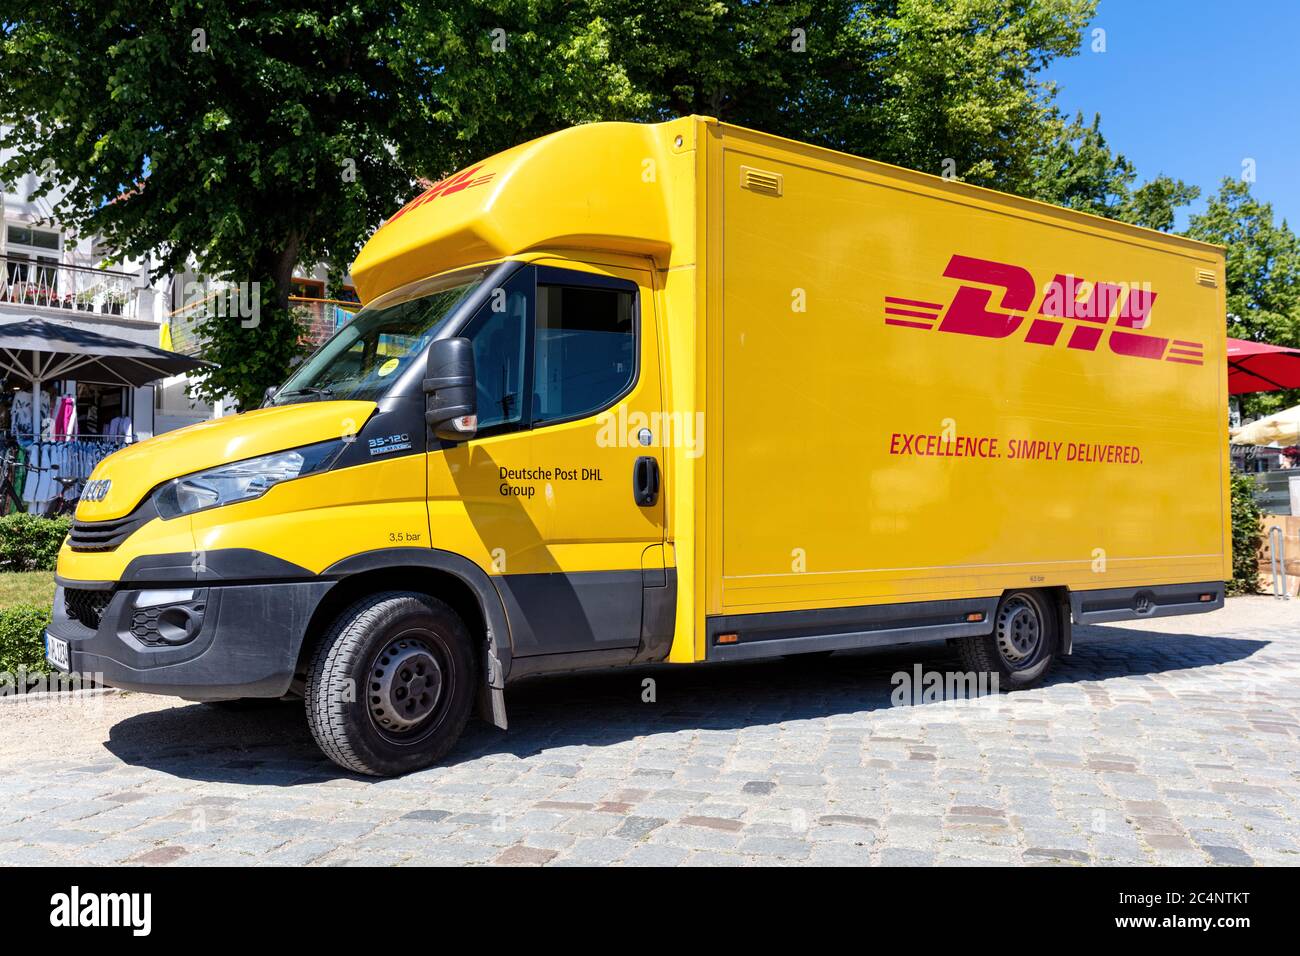 DHL delivery van. DHL is a division of the German logistics company Deutsche Post AG providing international express mail services. Stock Photo